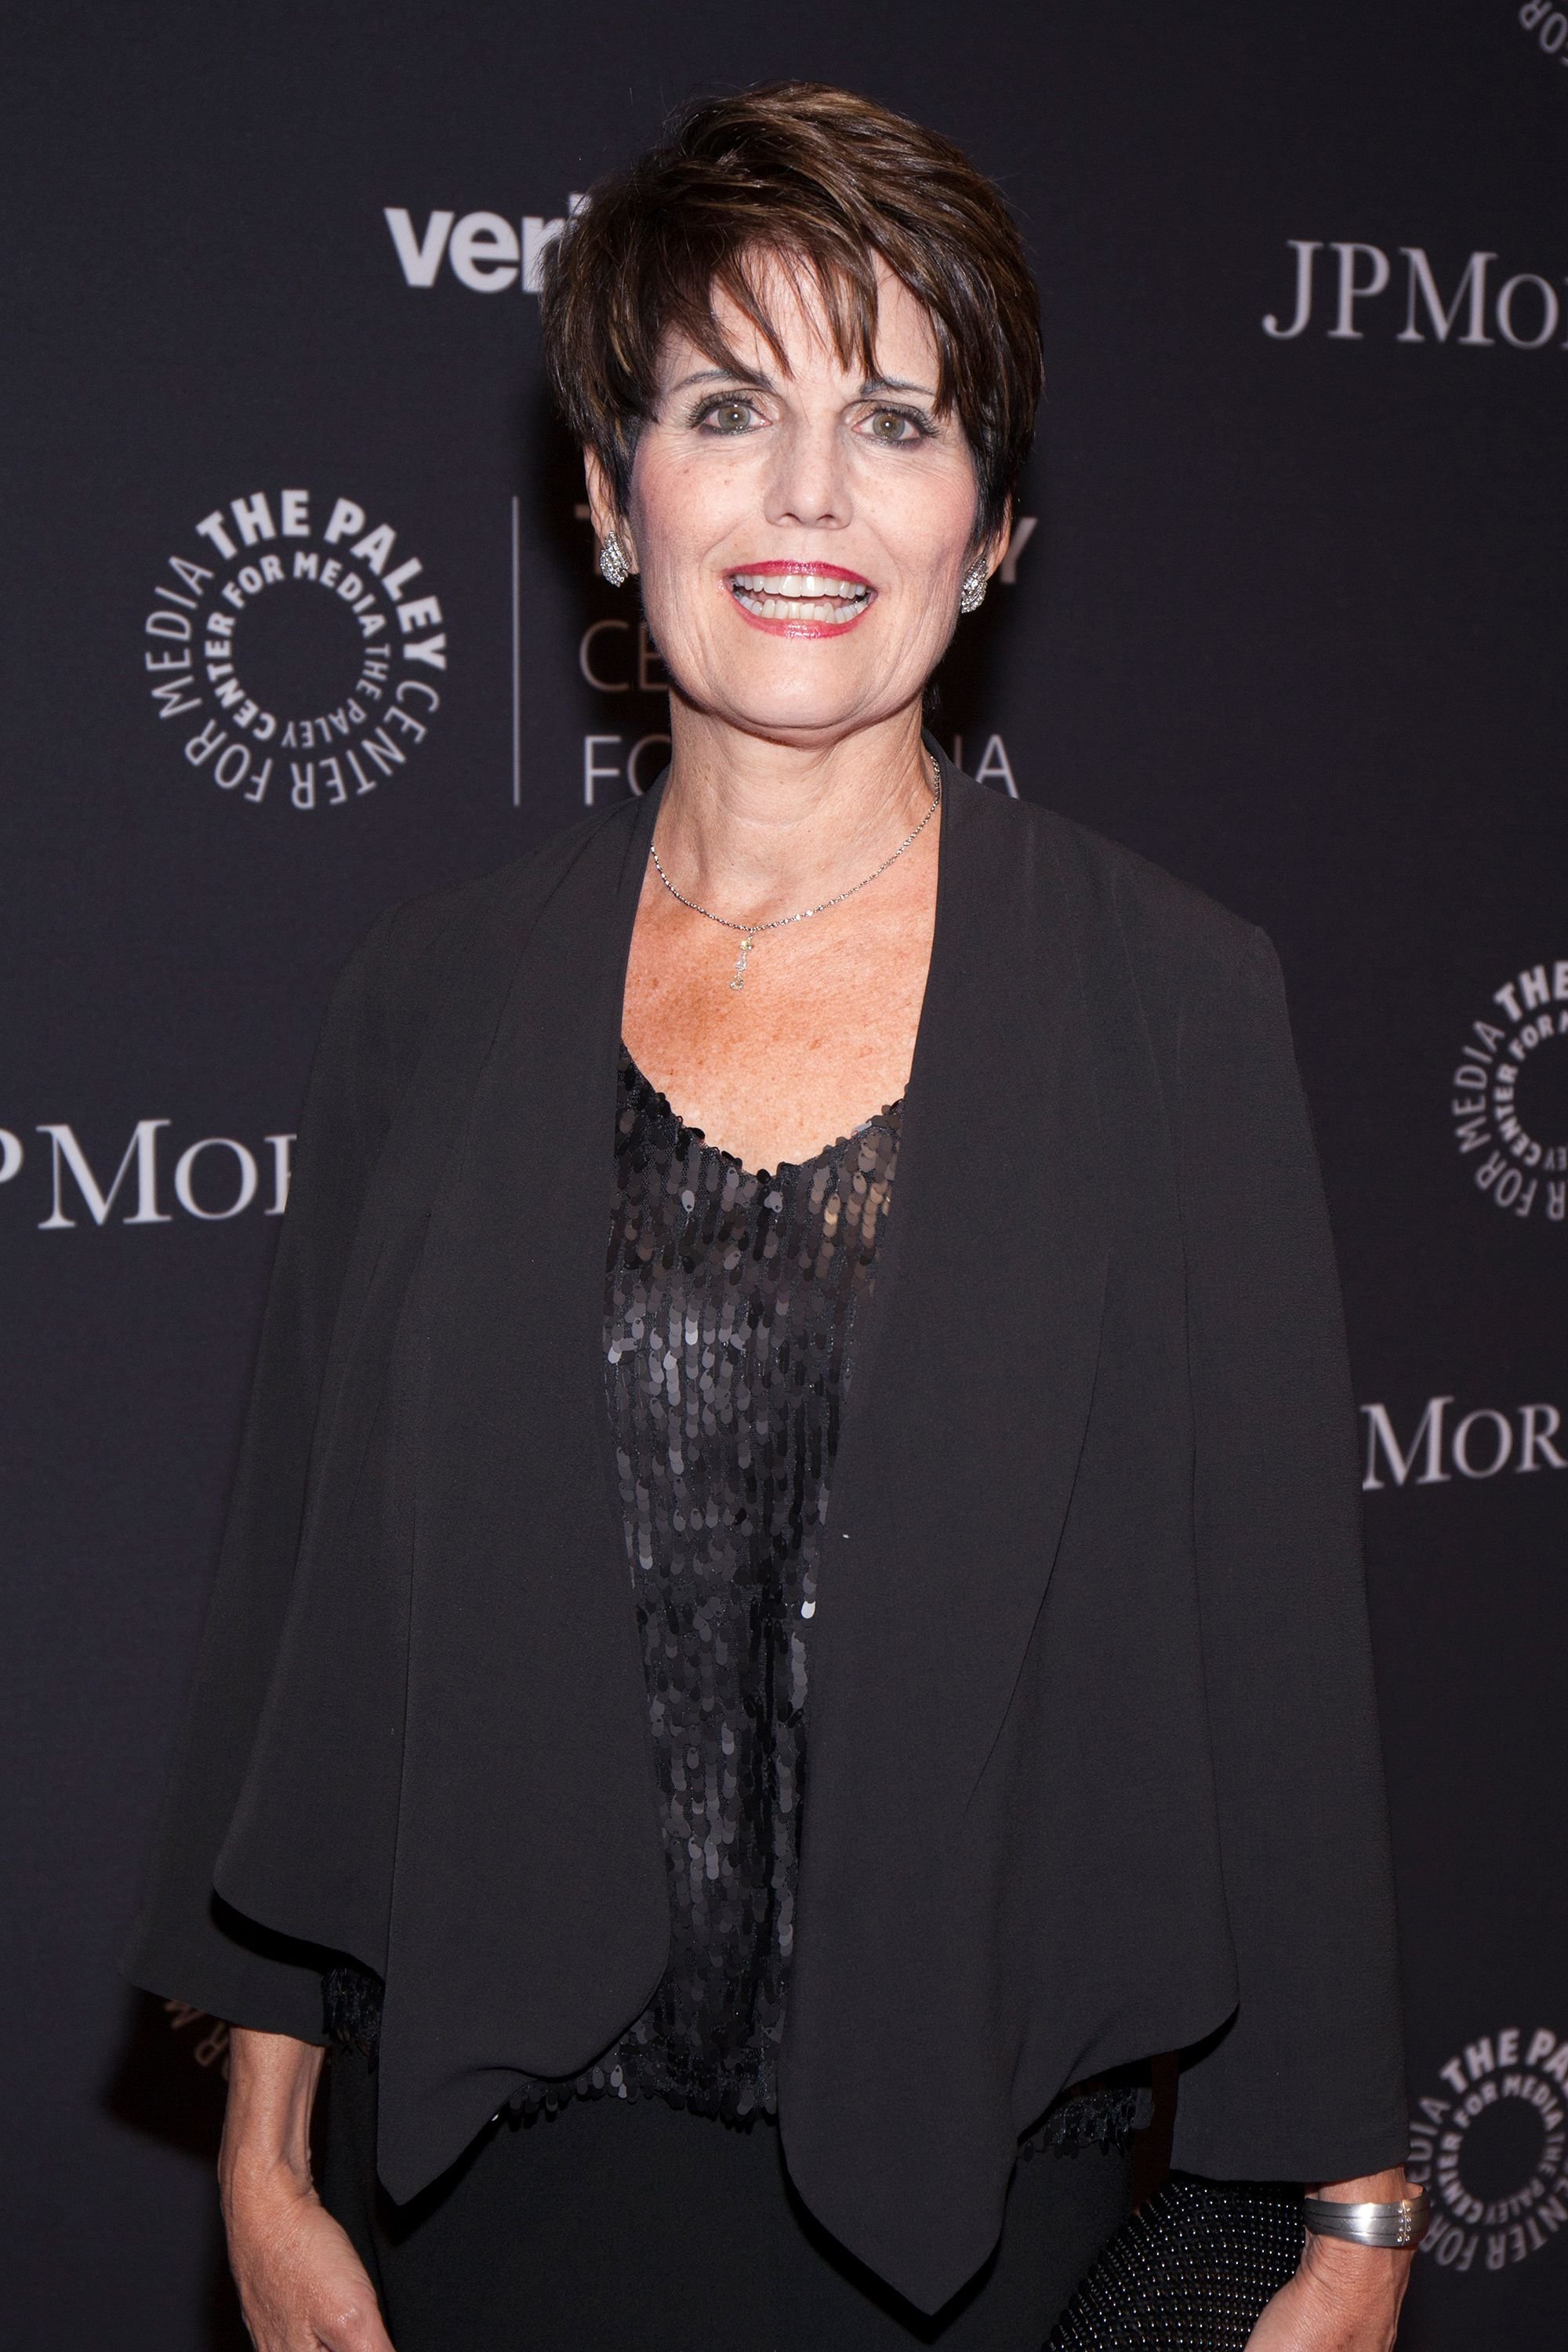 Lucie Arnaz during the 2016 Paley Center for Media's Tribute To Hispanic Achievements In Television at Cipriani Wall Street on May 18, 2016 in New York. | Source: Getty Images